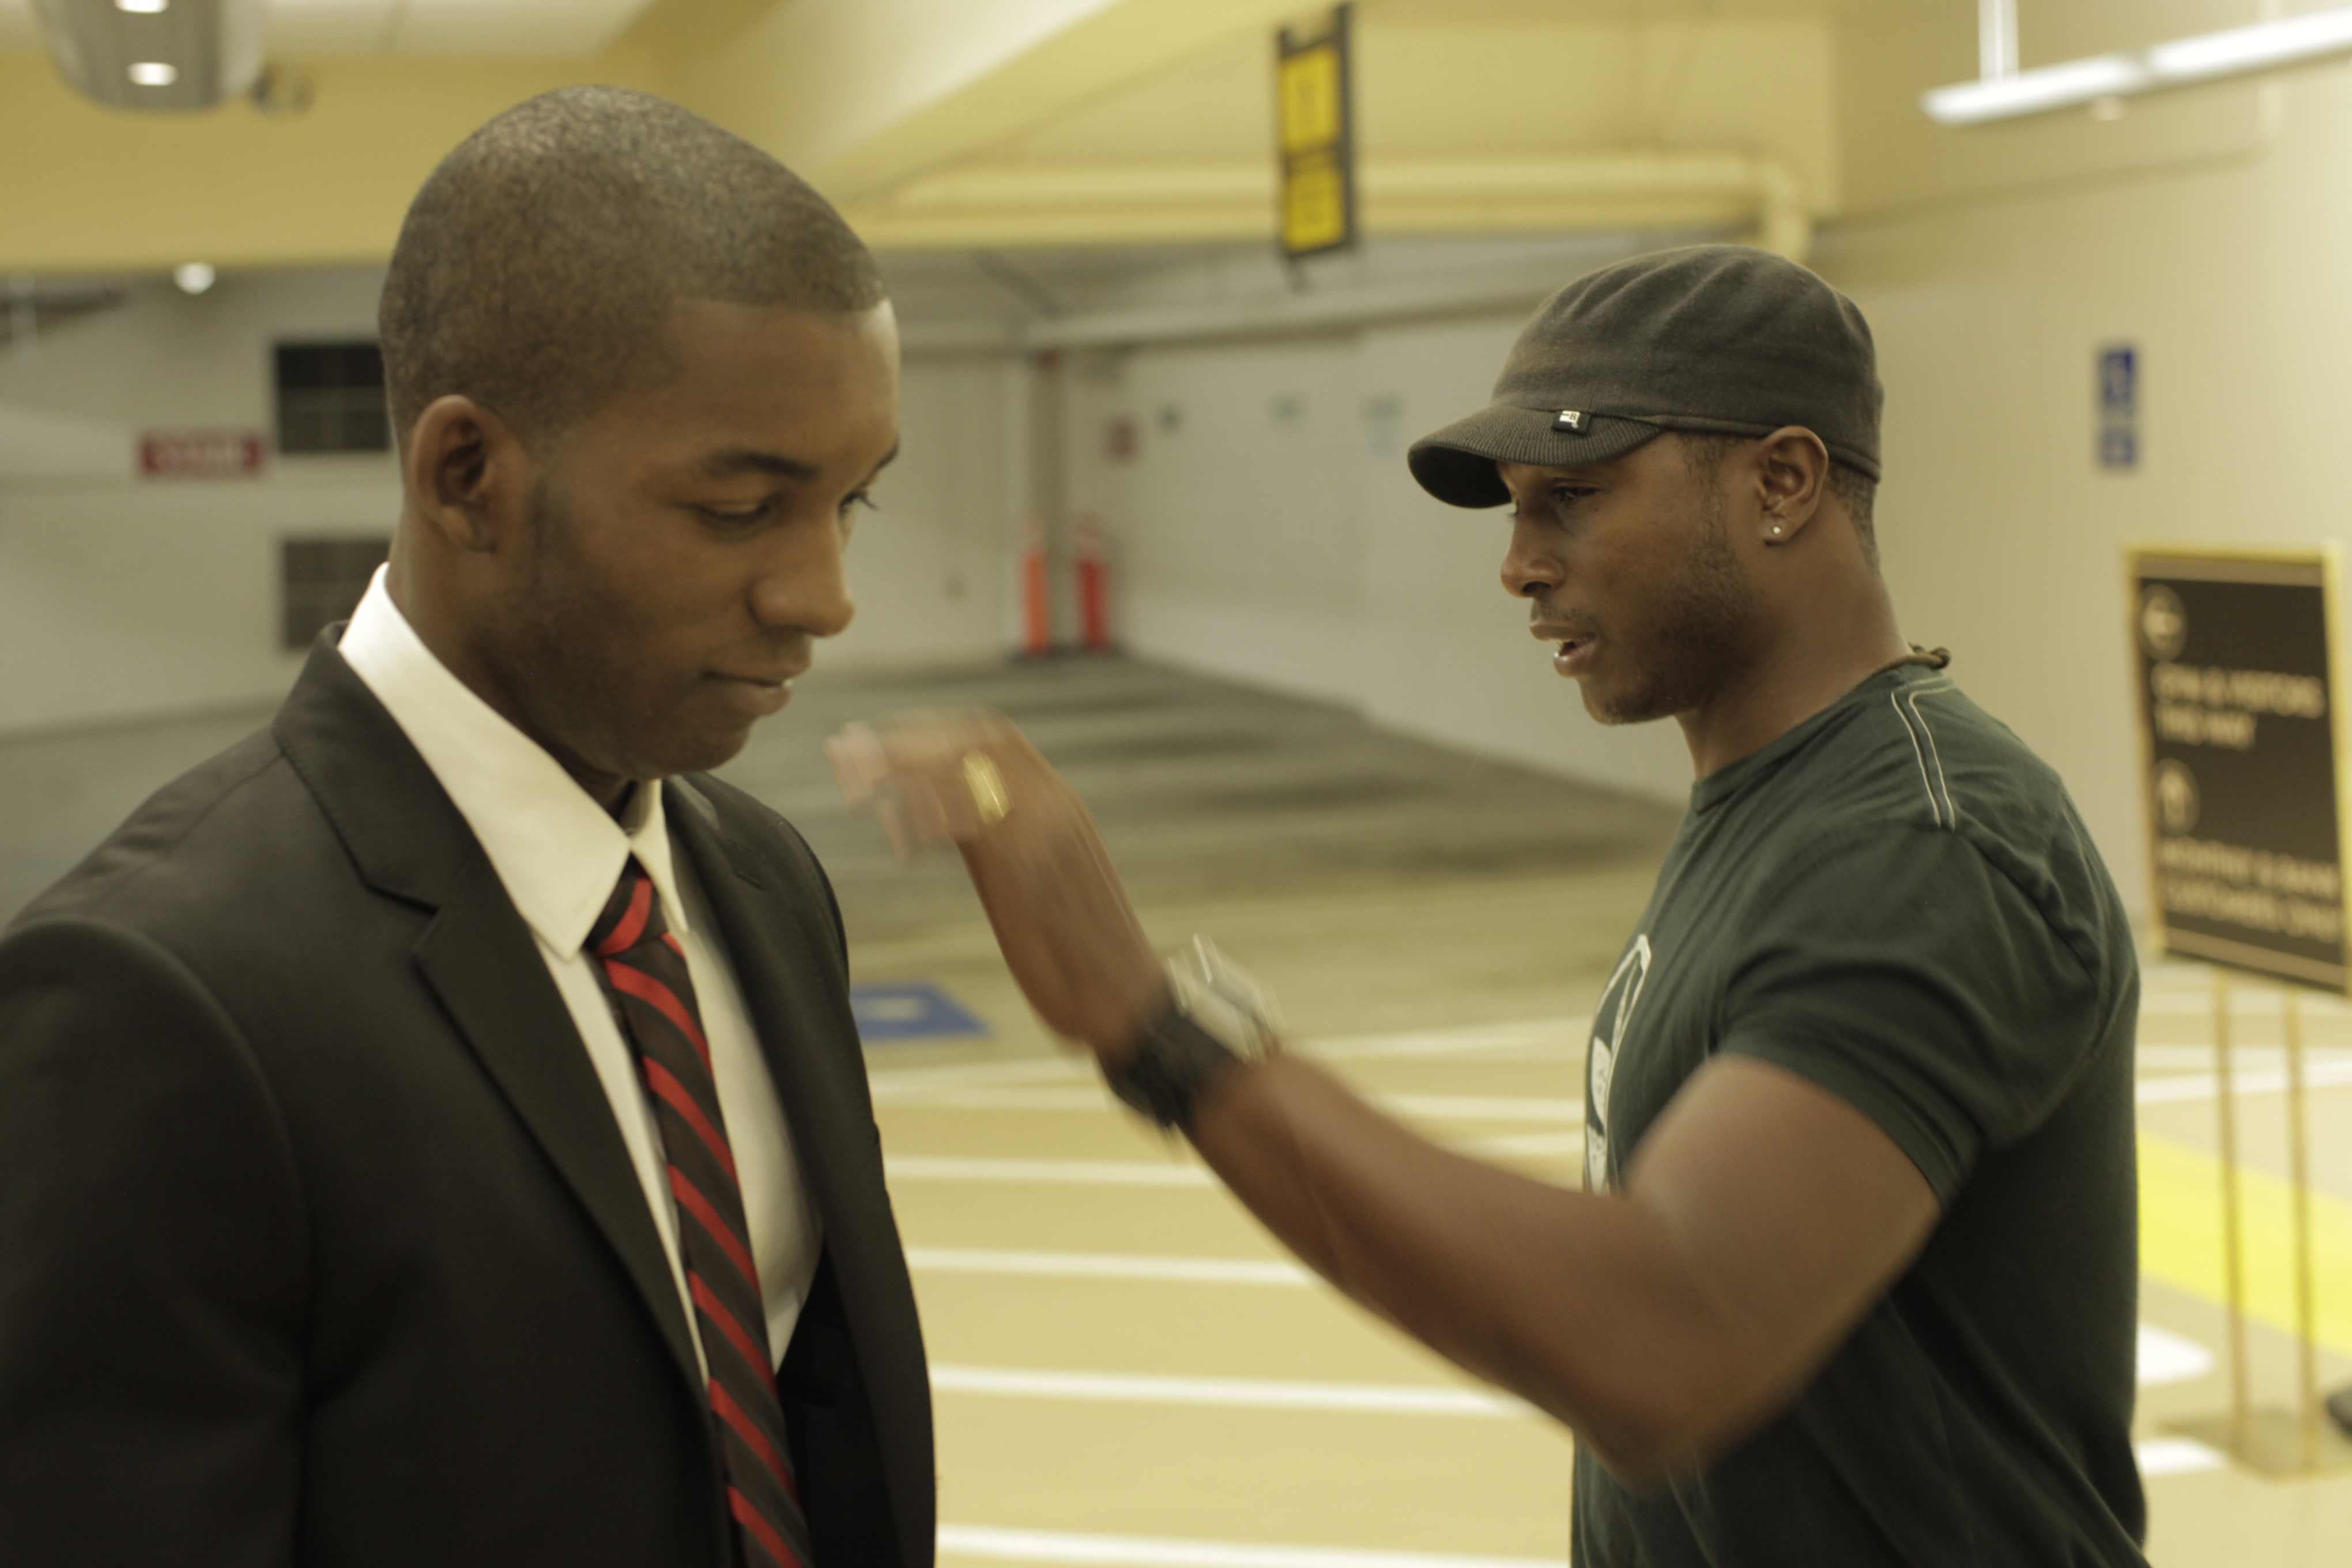 Eric Smith-Gunn gives support to Darren Thomas on the set of the film 